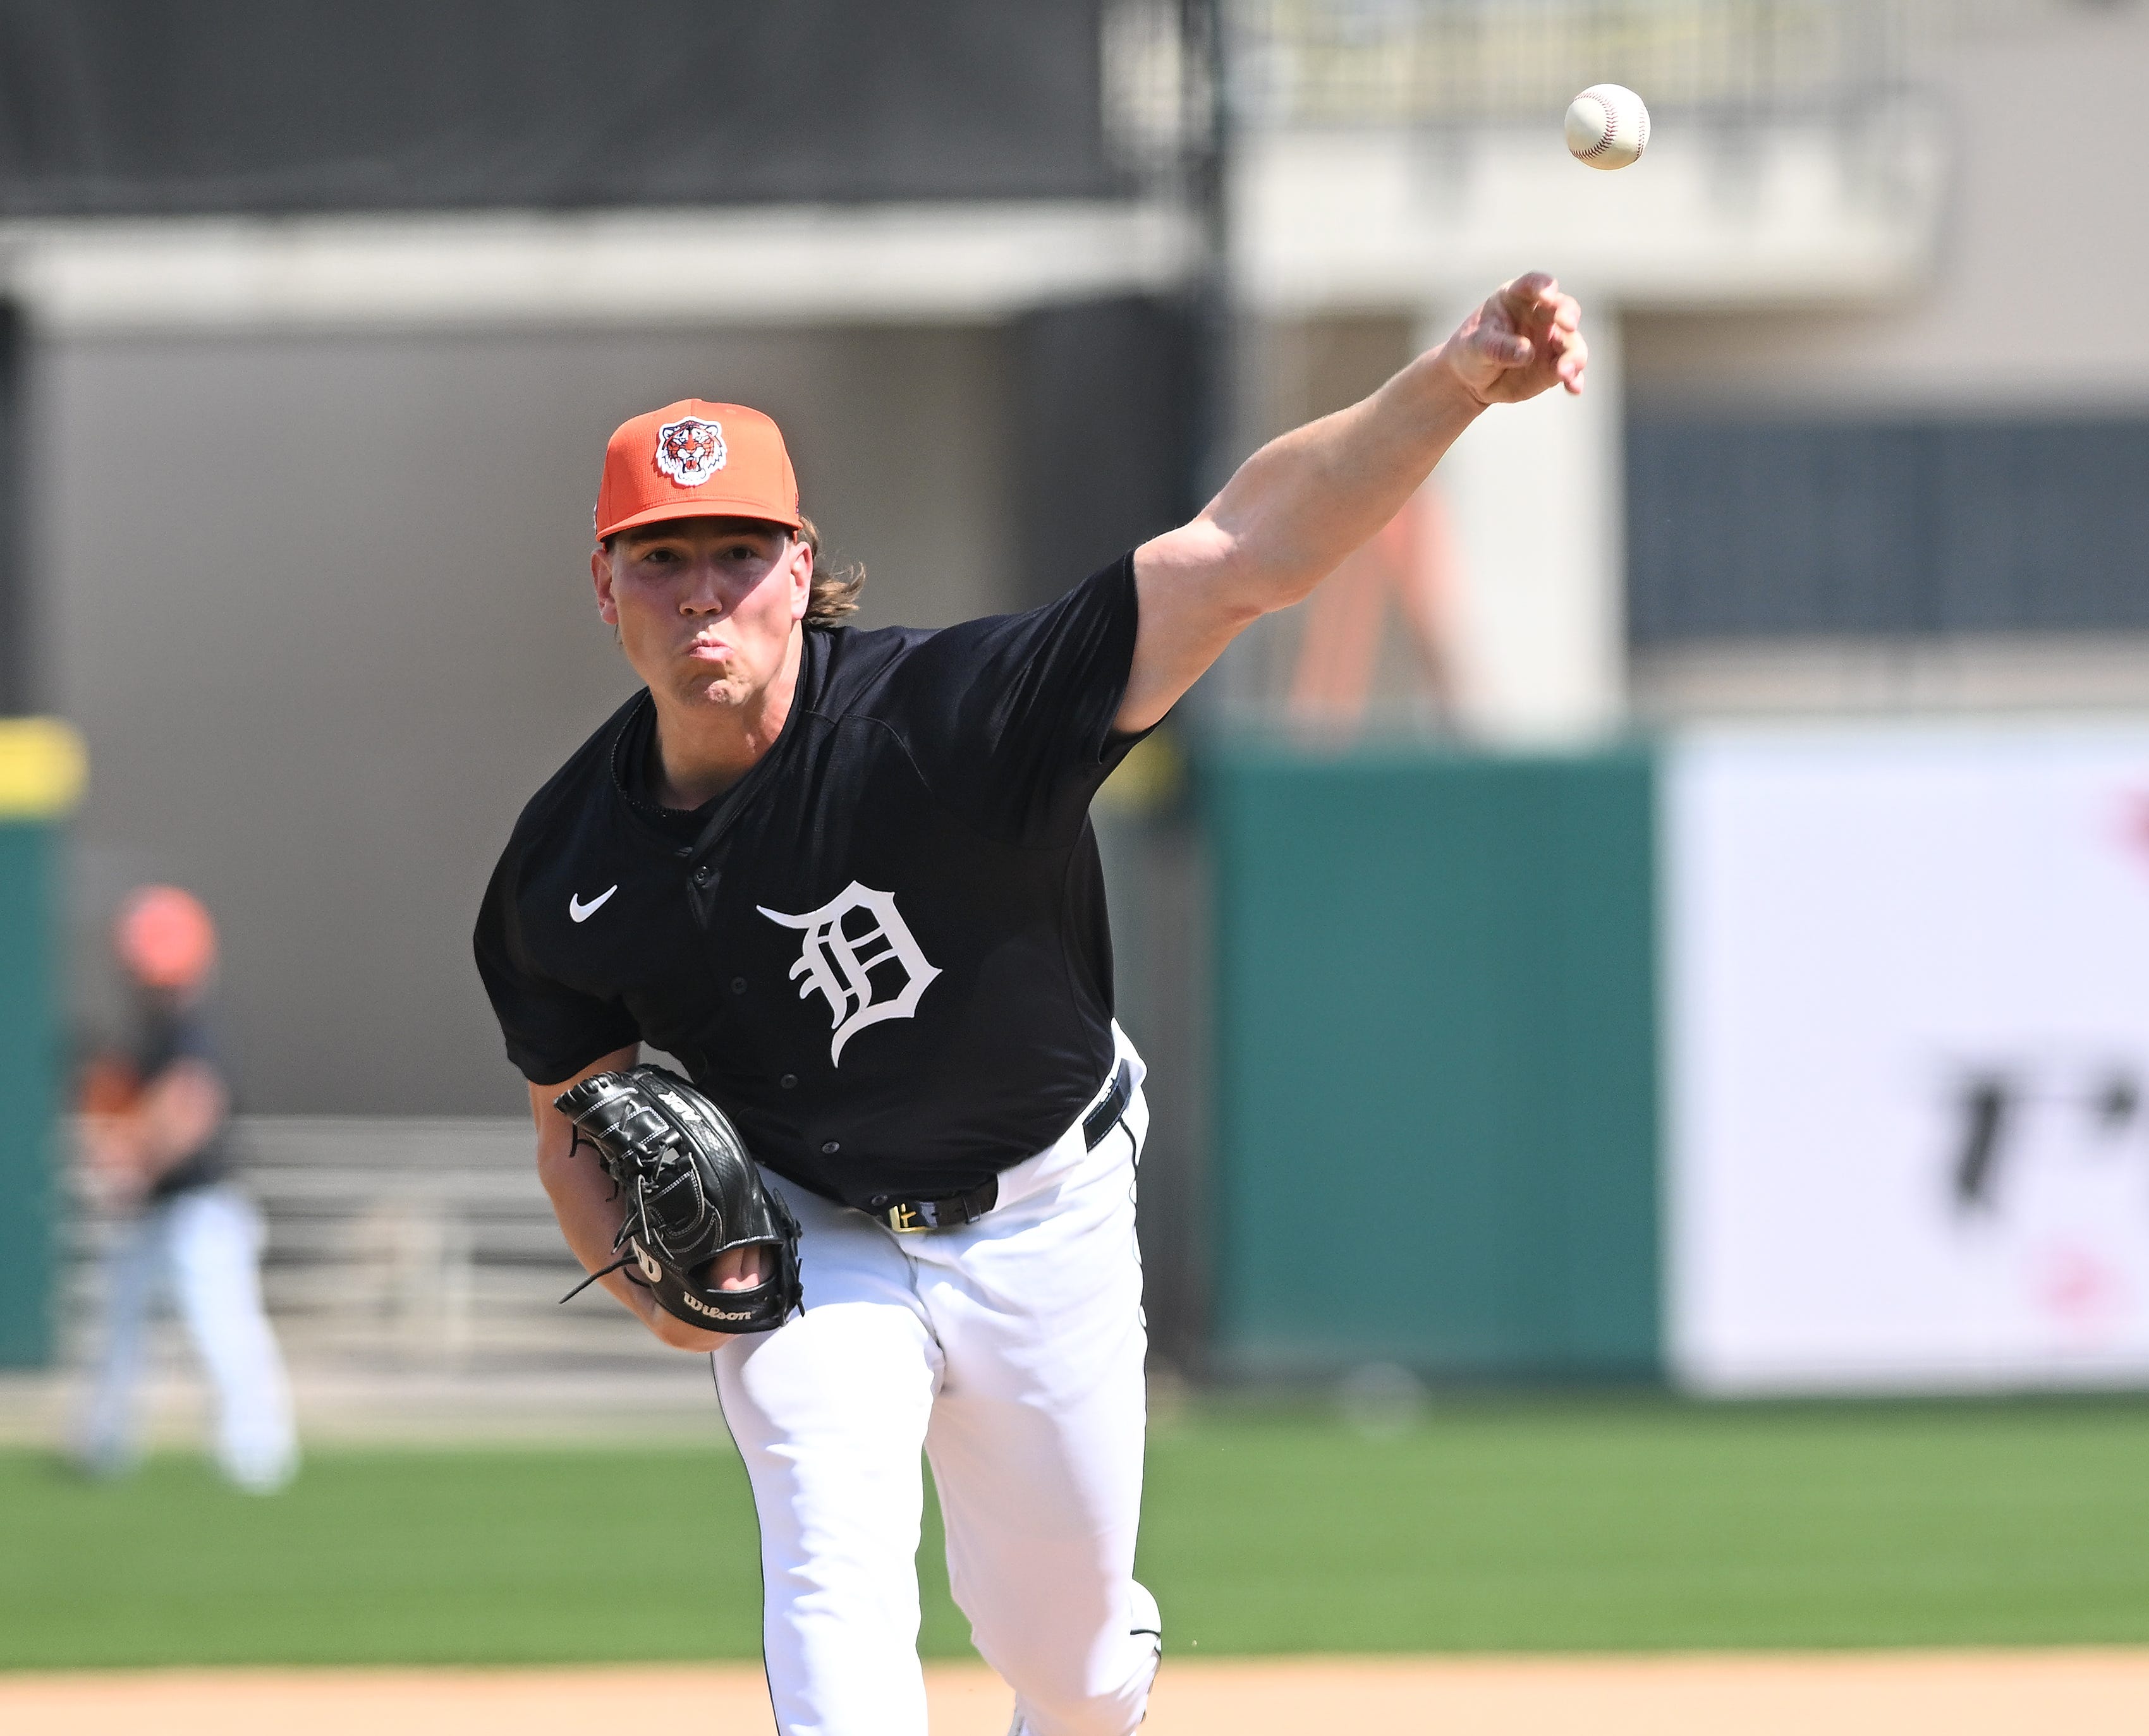 No. 87 – Tyler Holton – LHP, 6-2, 220, Age in season: 28

What a revelation he turned out to be. He was the last pitcher cut last season, but he was called up in April and posted one of the best rookie seasons of any pitcher in Tigers history: 2.11 ERA, 0.867 WHIP. Five of his six pitches held hitters under .200 — how crazy is that? He had positive run values on his four-seamer (9), sinker (6), slider (4), cutter (2) and changeup (2). He was used in multiple-innings stints for the most part (85.1 innings pitched). It remains to be seen how the Tigers use him and fellow lefty Andrew Chafin. Holton started getting more leverage innings last season. Expect that to continue, as manager AJ Hinch plans to mix and match potentially six different relievers to finish off victories.

2024 salary: $770,000